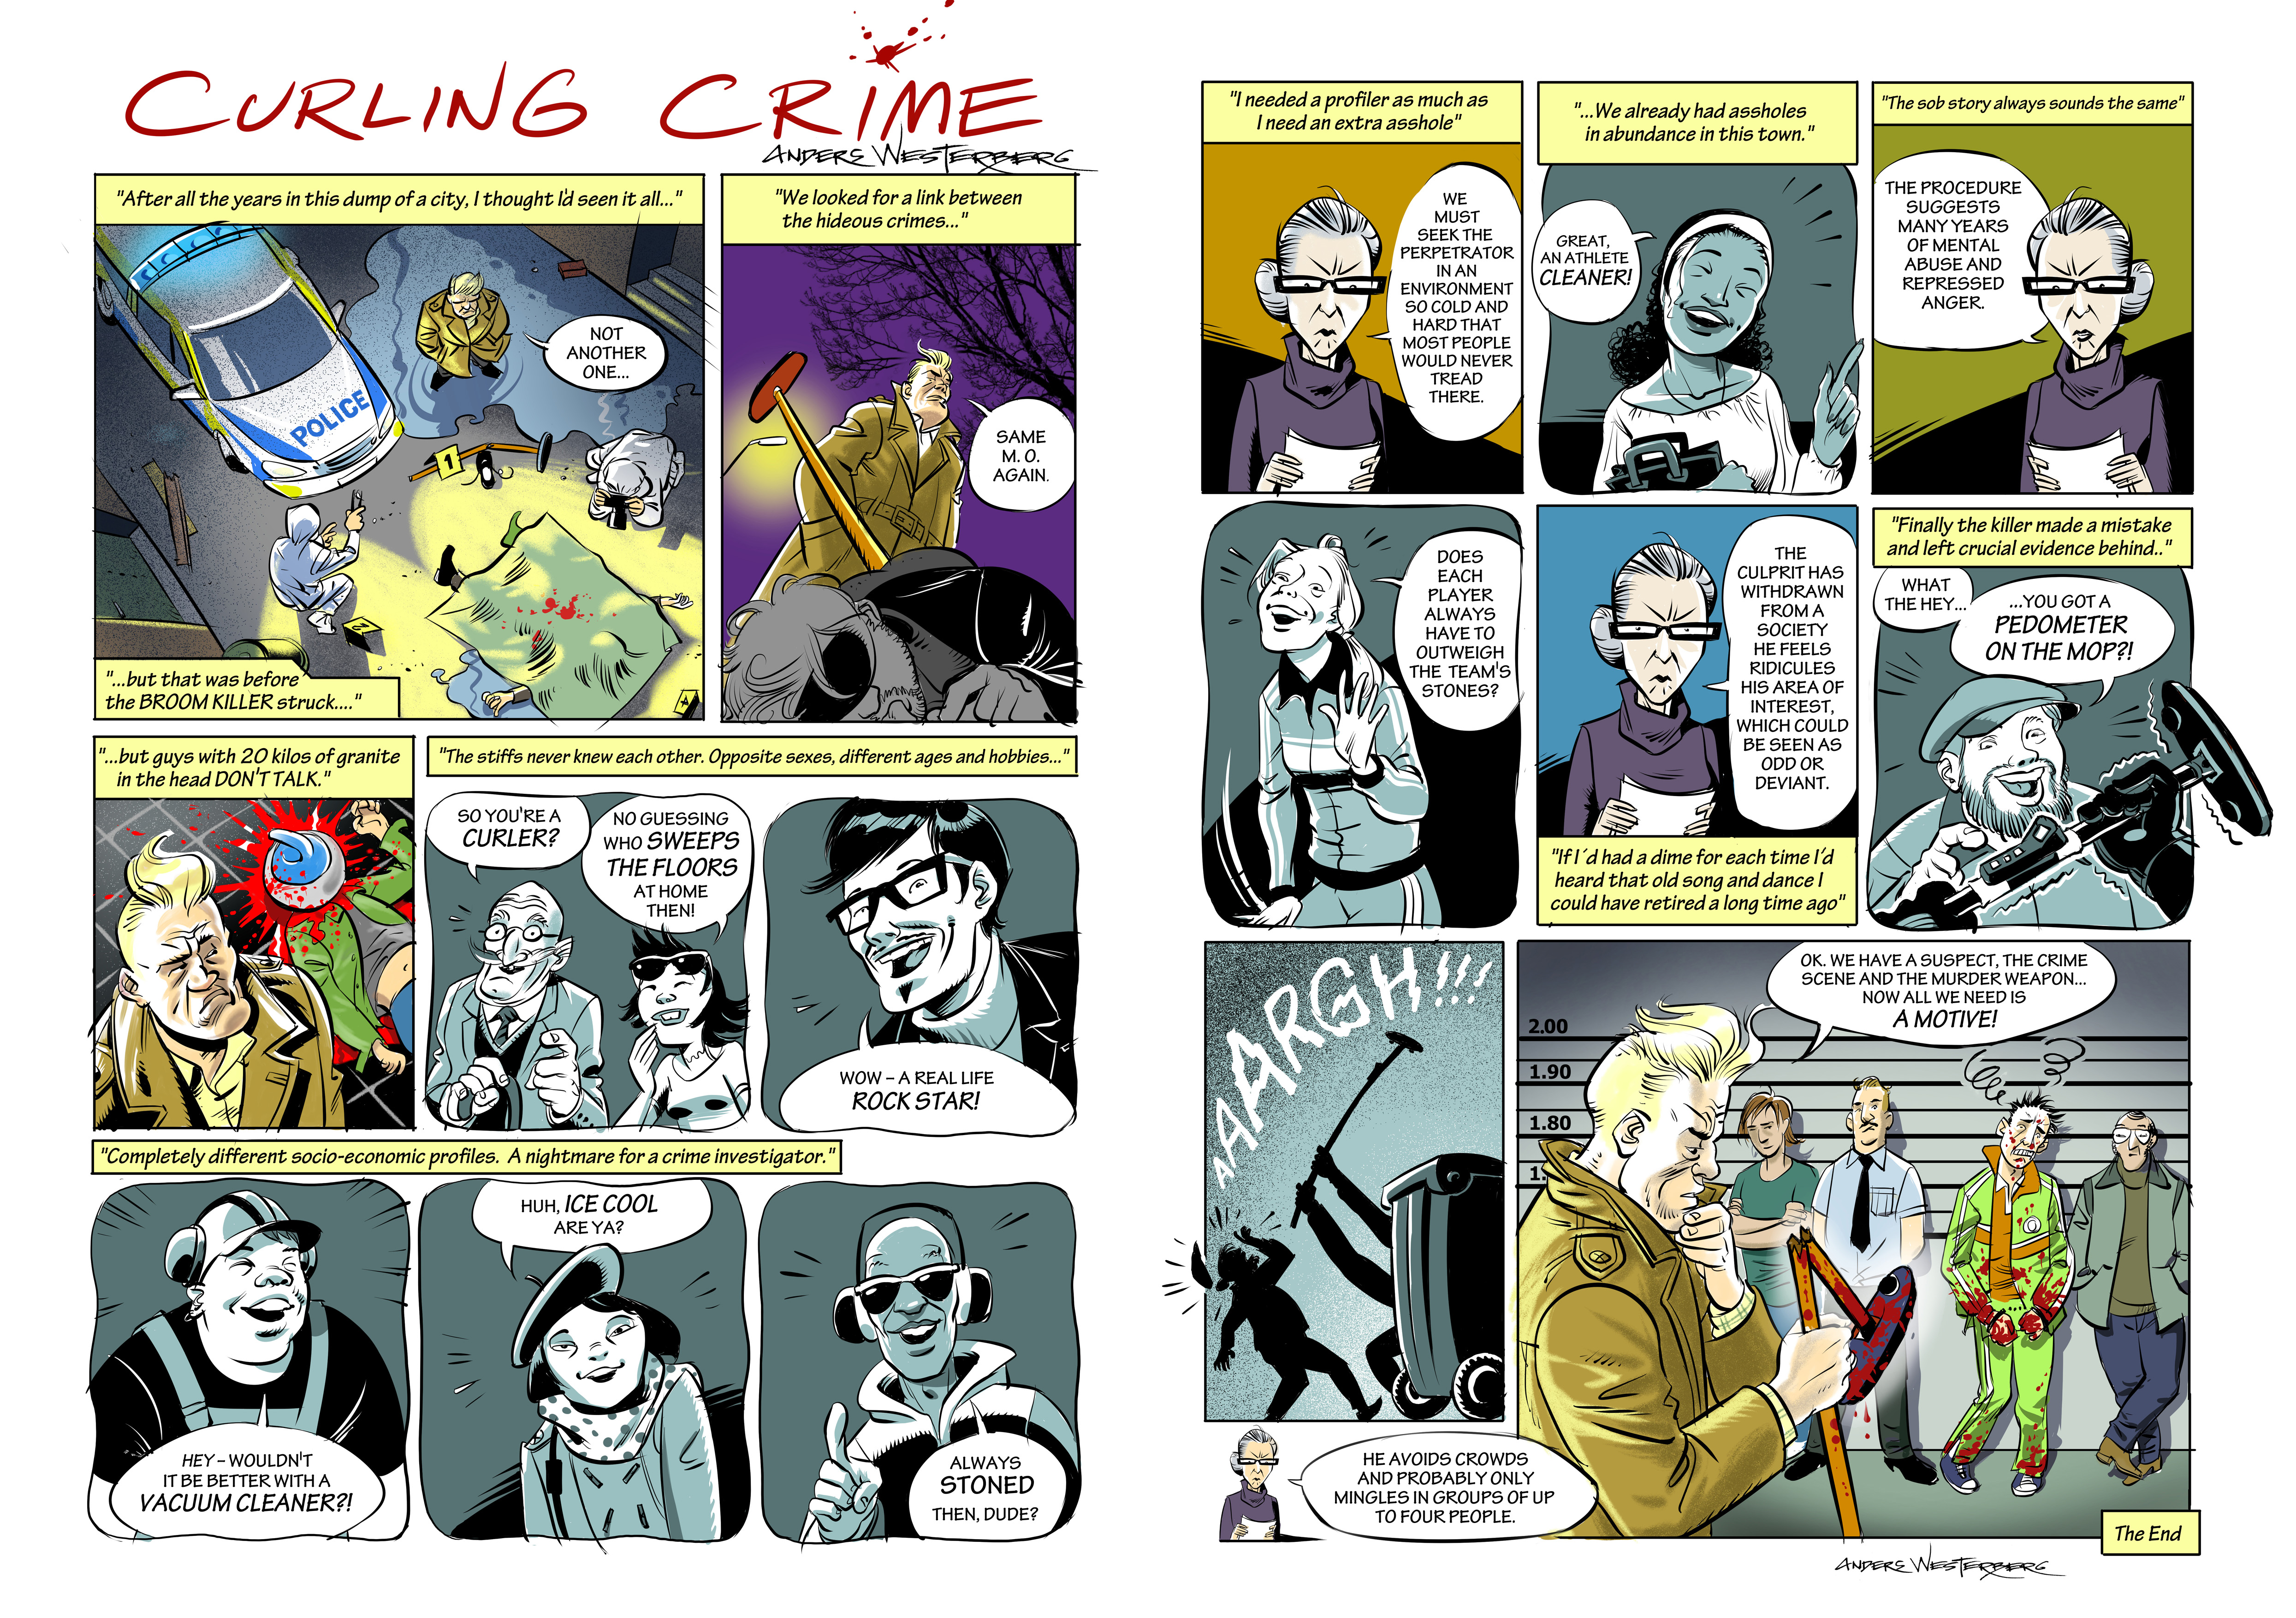 Anders Westerberg | The first ever curling noir crime comic. For The Curling News (Canada). Since illustrating and curling are my two fortes, why not bring them together?